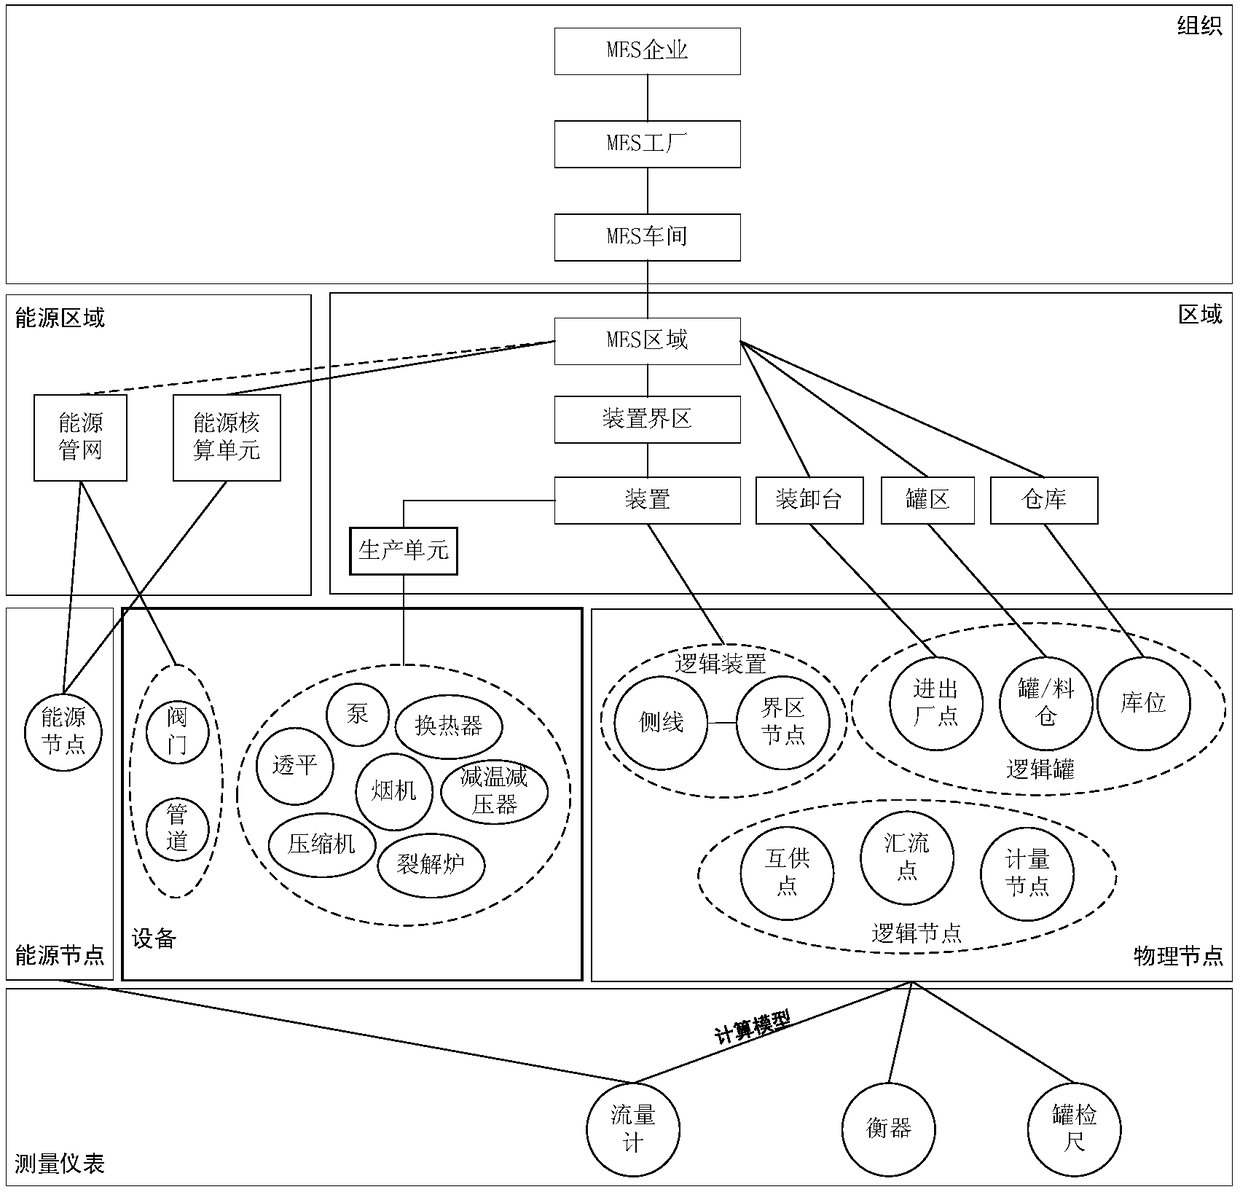 Plant model extension method for petrochemical enterprises based on object-oriented analysis